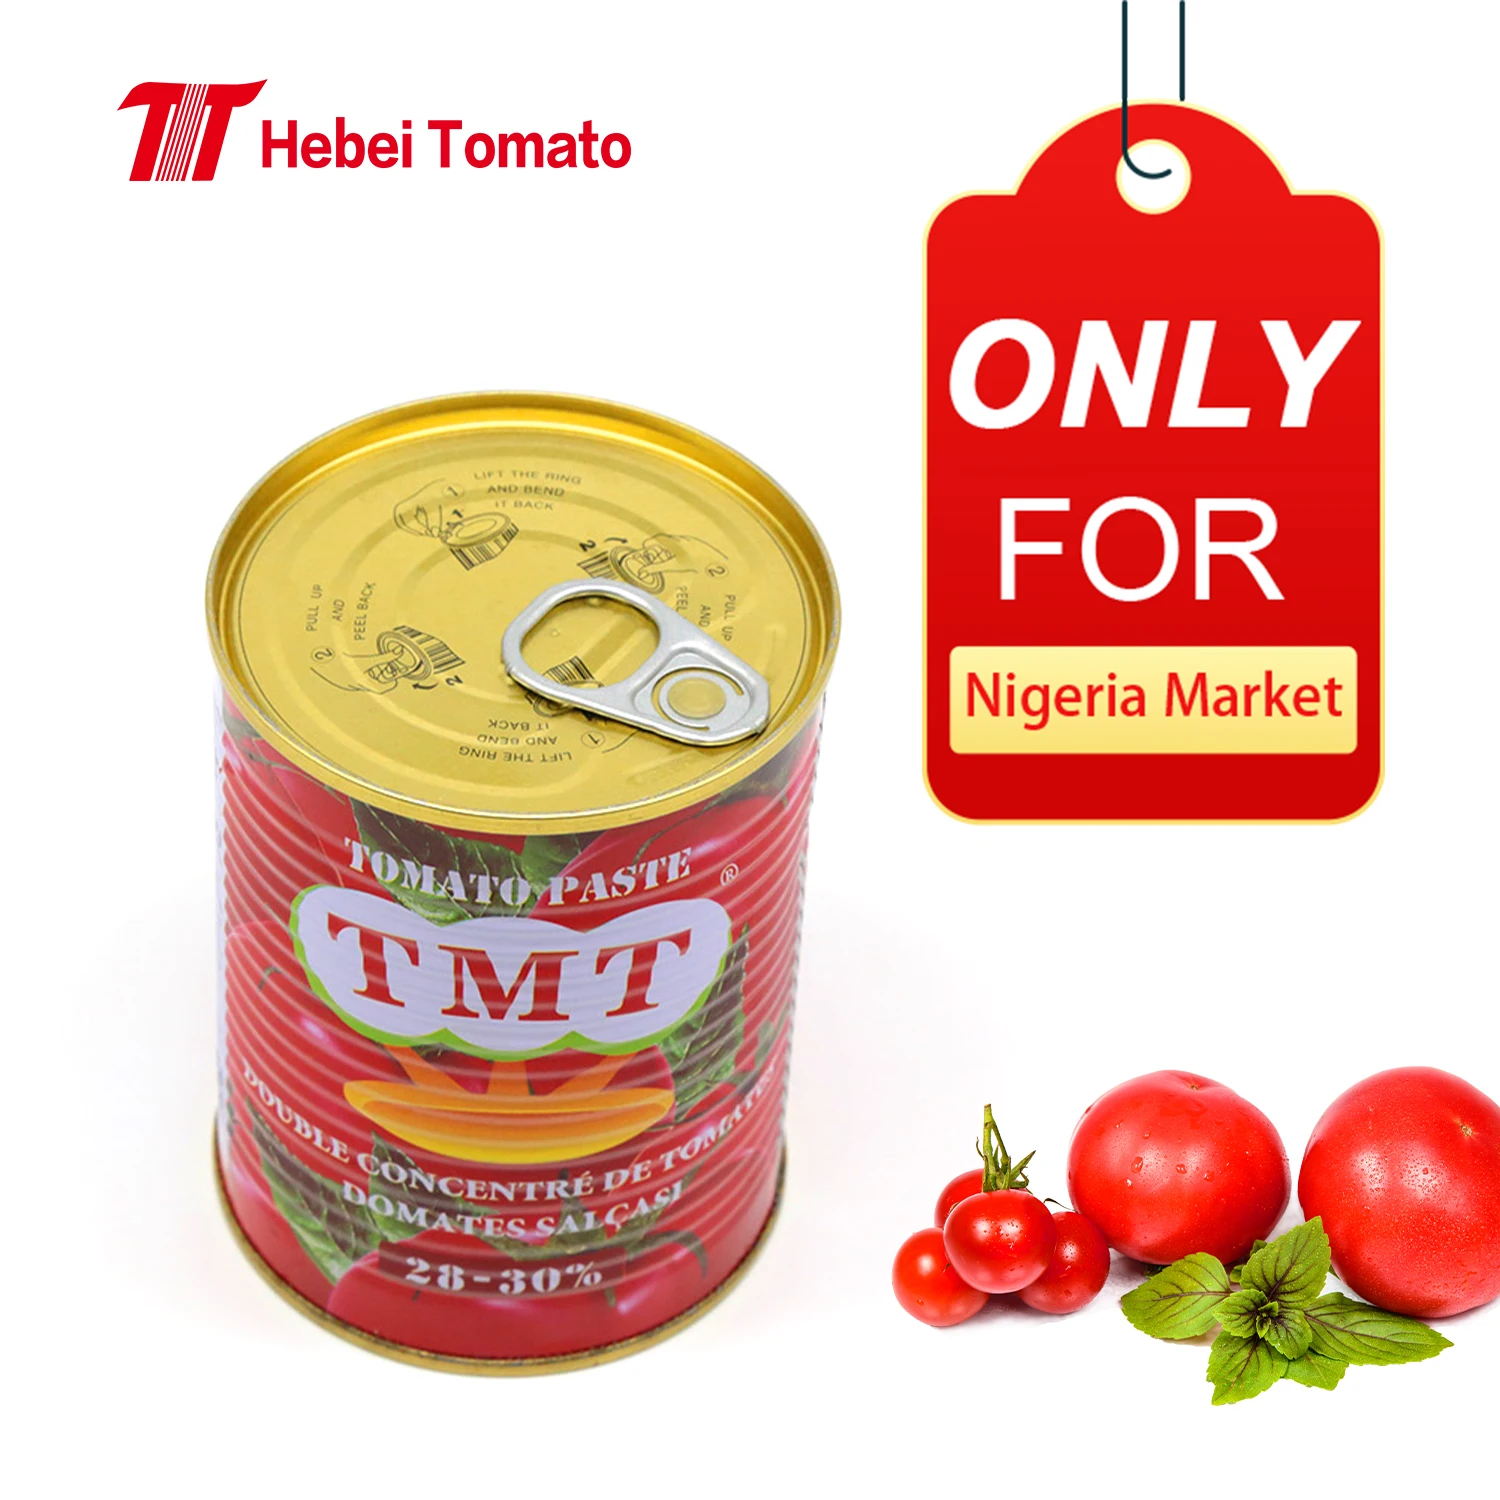 800g Canned Tomato Paste with Double Concentrate 28 30% Brix Middle East Market (1600464700591)